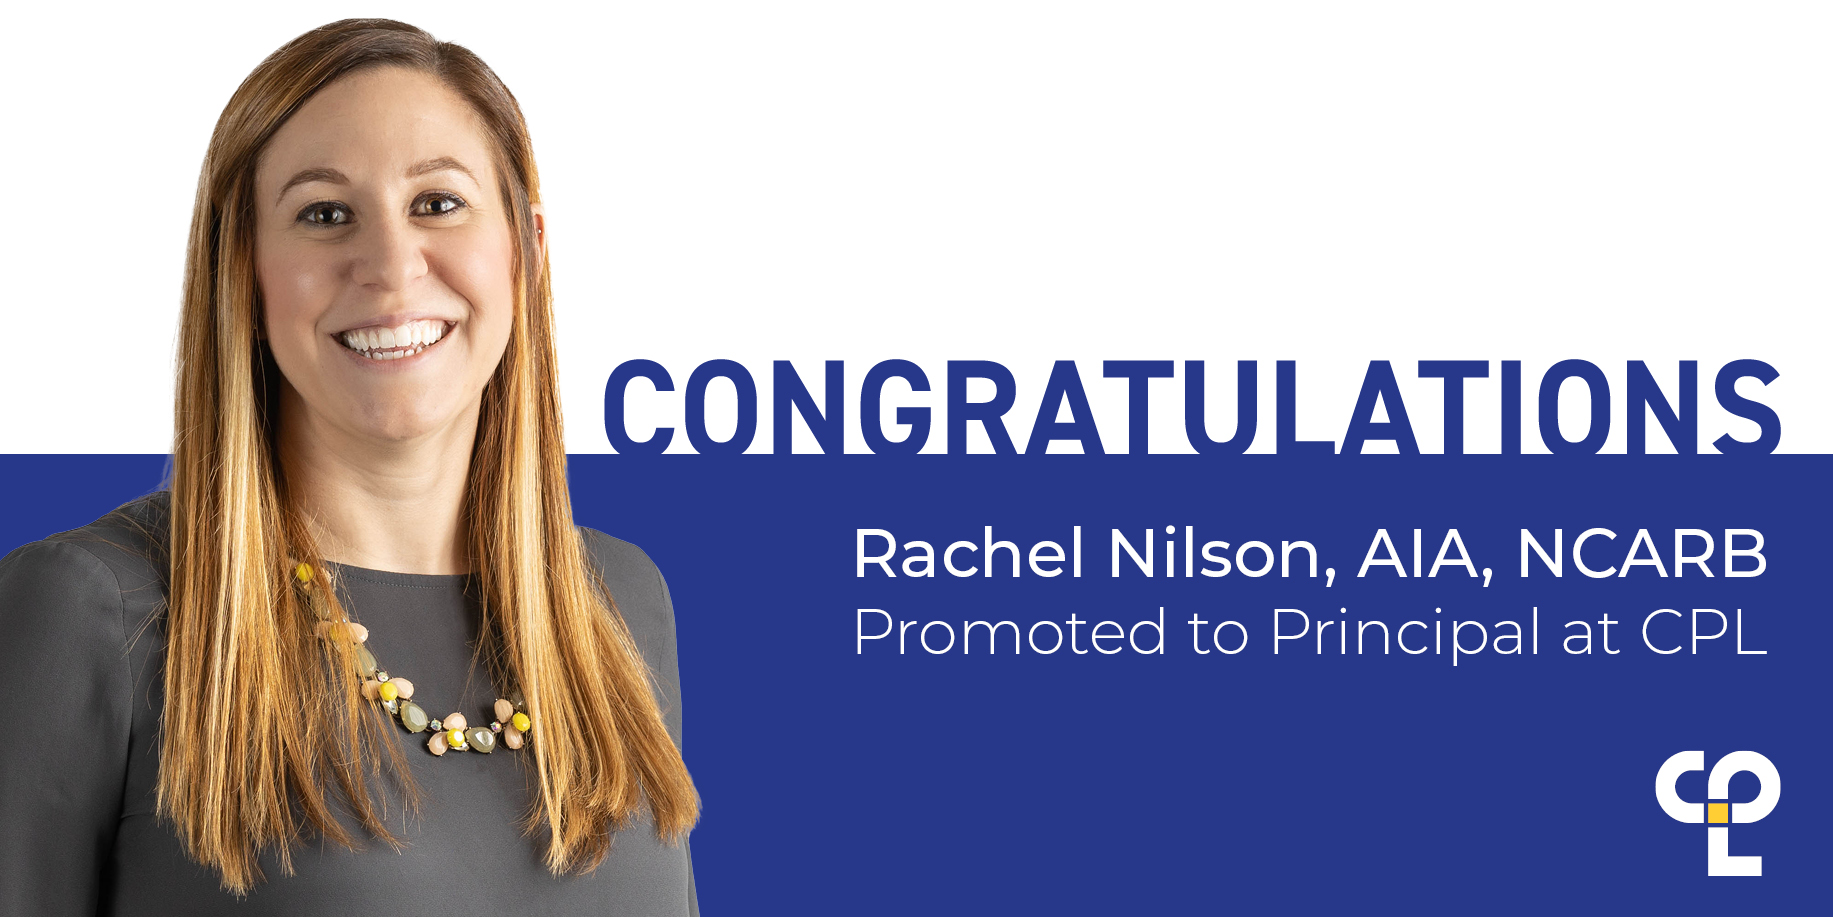 Graphic shows a woman with orange/reddish hair smiling on the left side. The right-side reads "Congratulations Rachel Nilson, AIA, NCARB Promoted to Principal at CPL" Under that is the CPL Logo. Rachel works from the Charlotte, NC office.